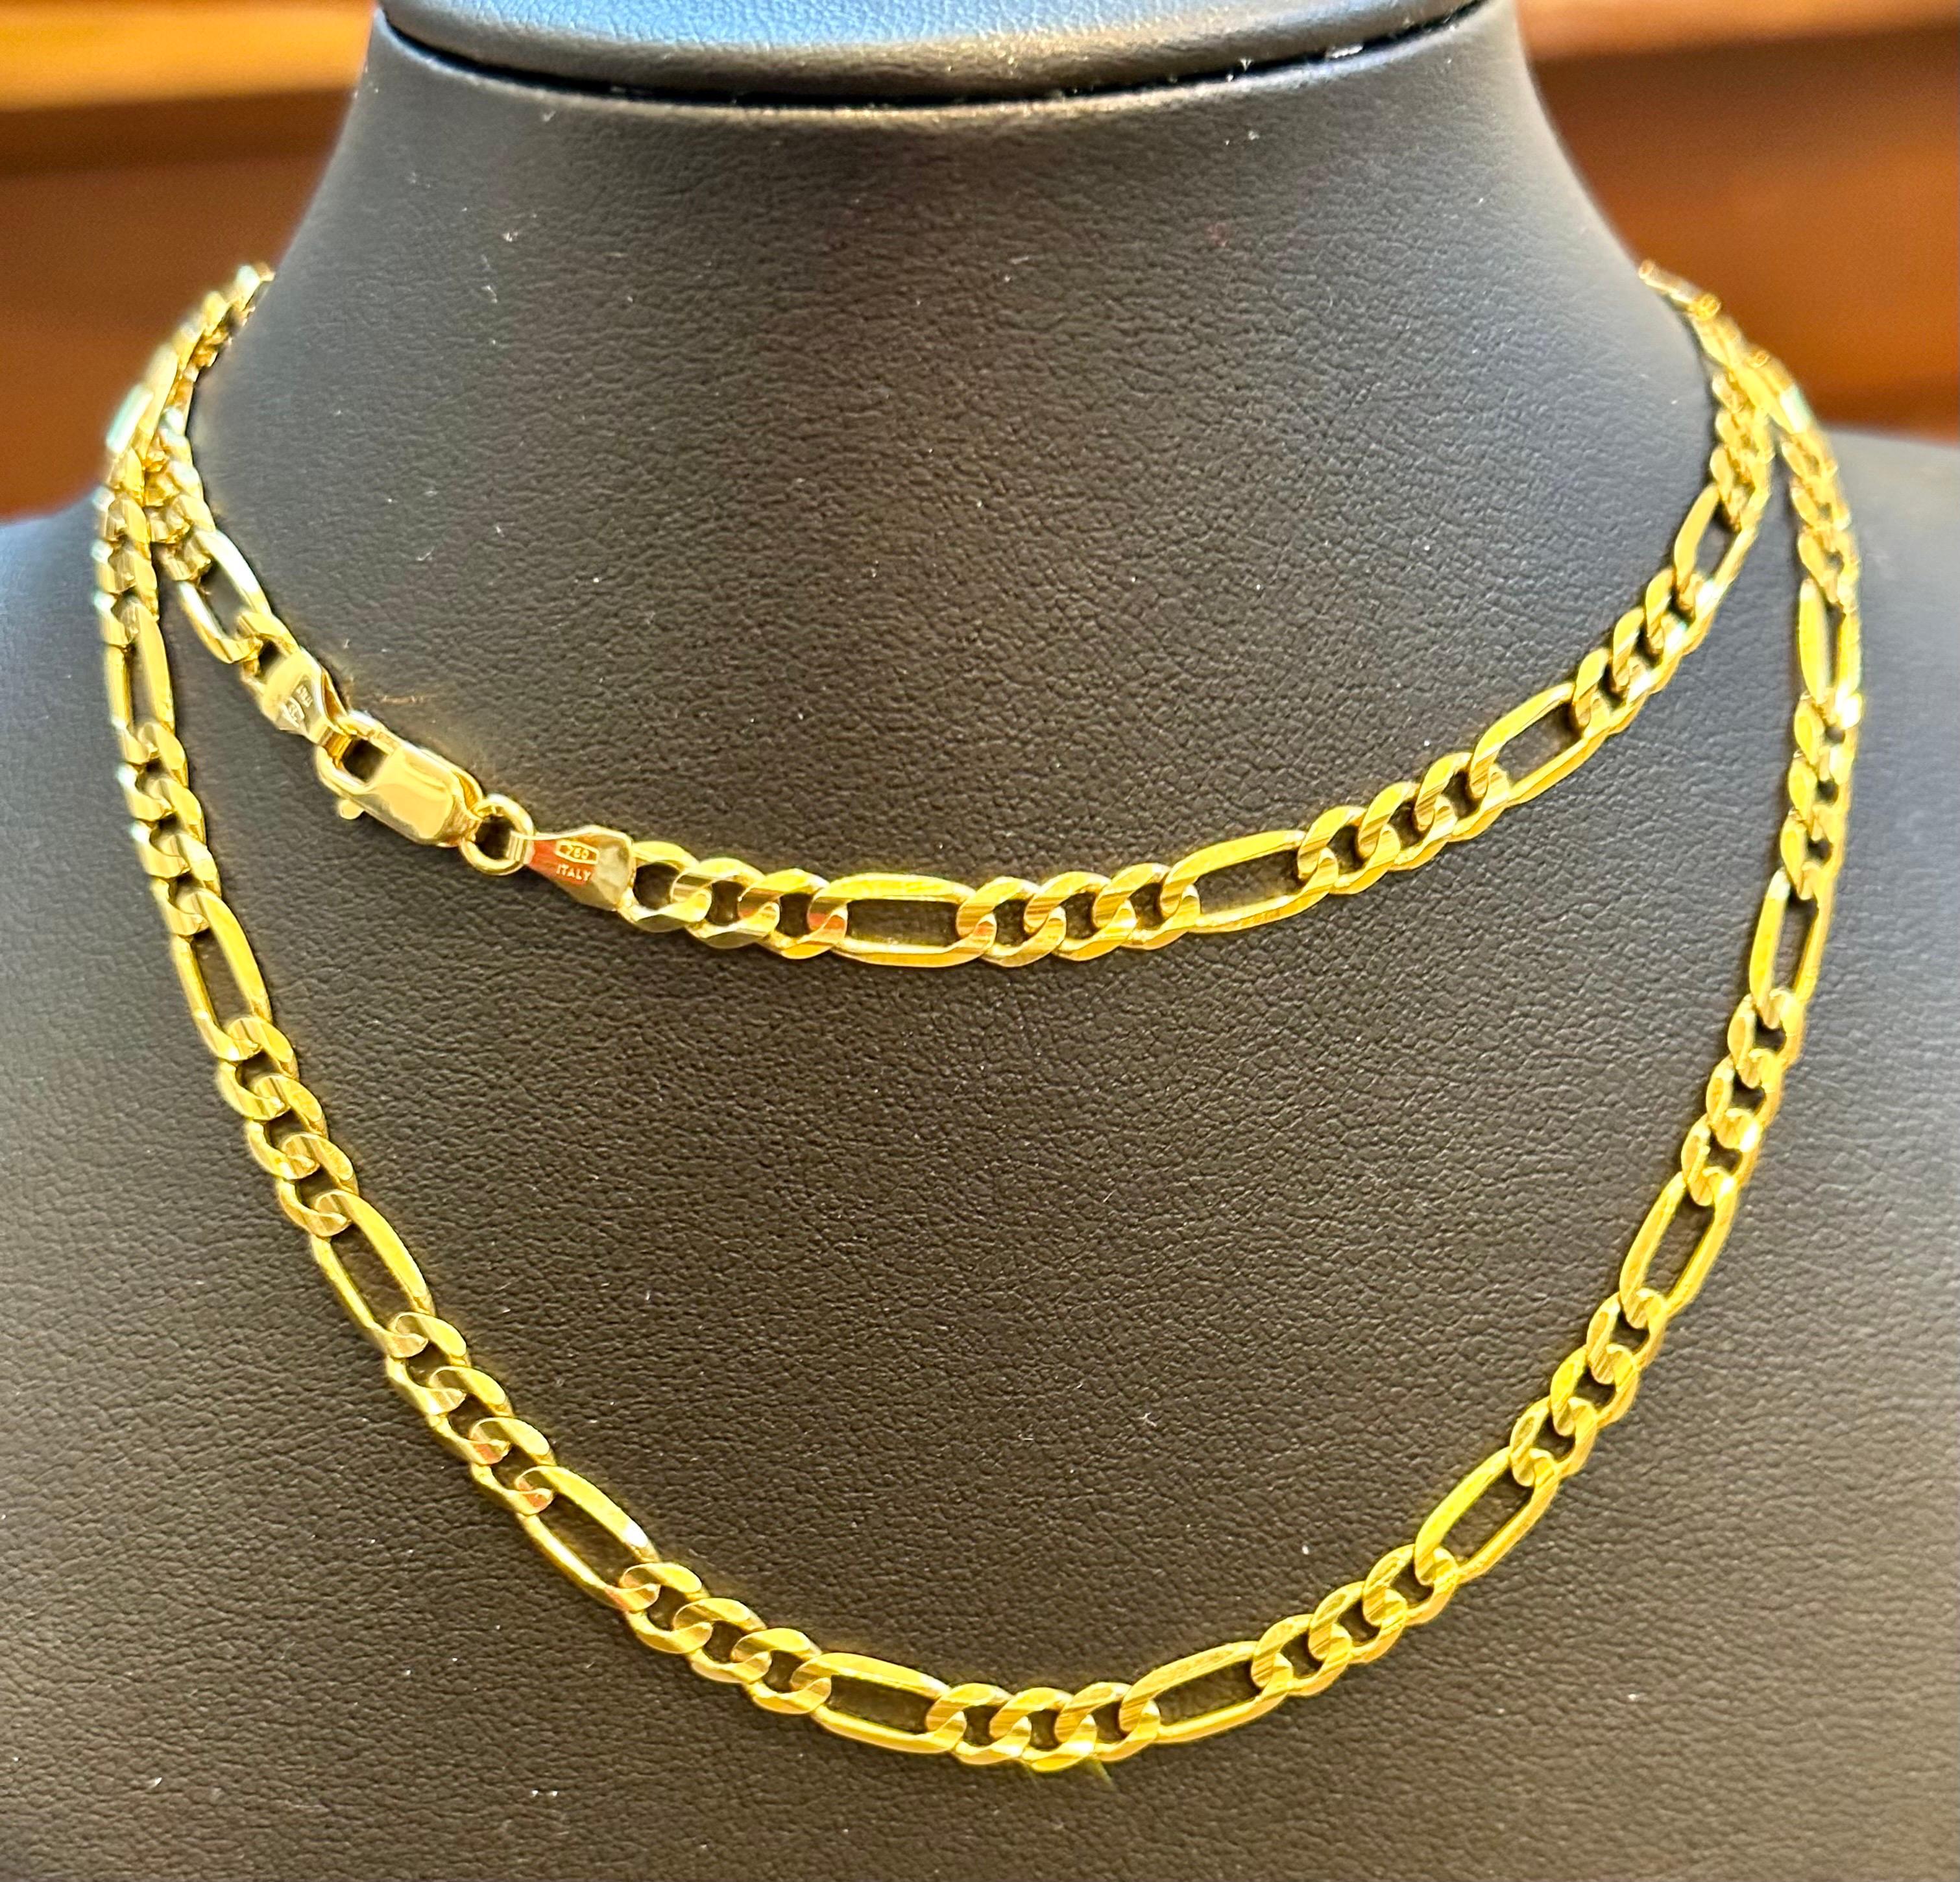 Vintage 18 Karat Yellow Gold 20 Gm Figaro Chain Necklace, Made in Italy 2